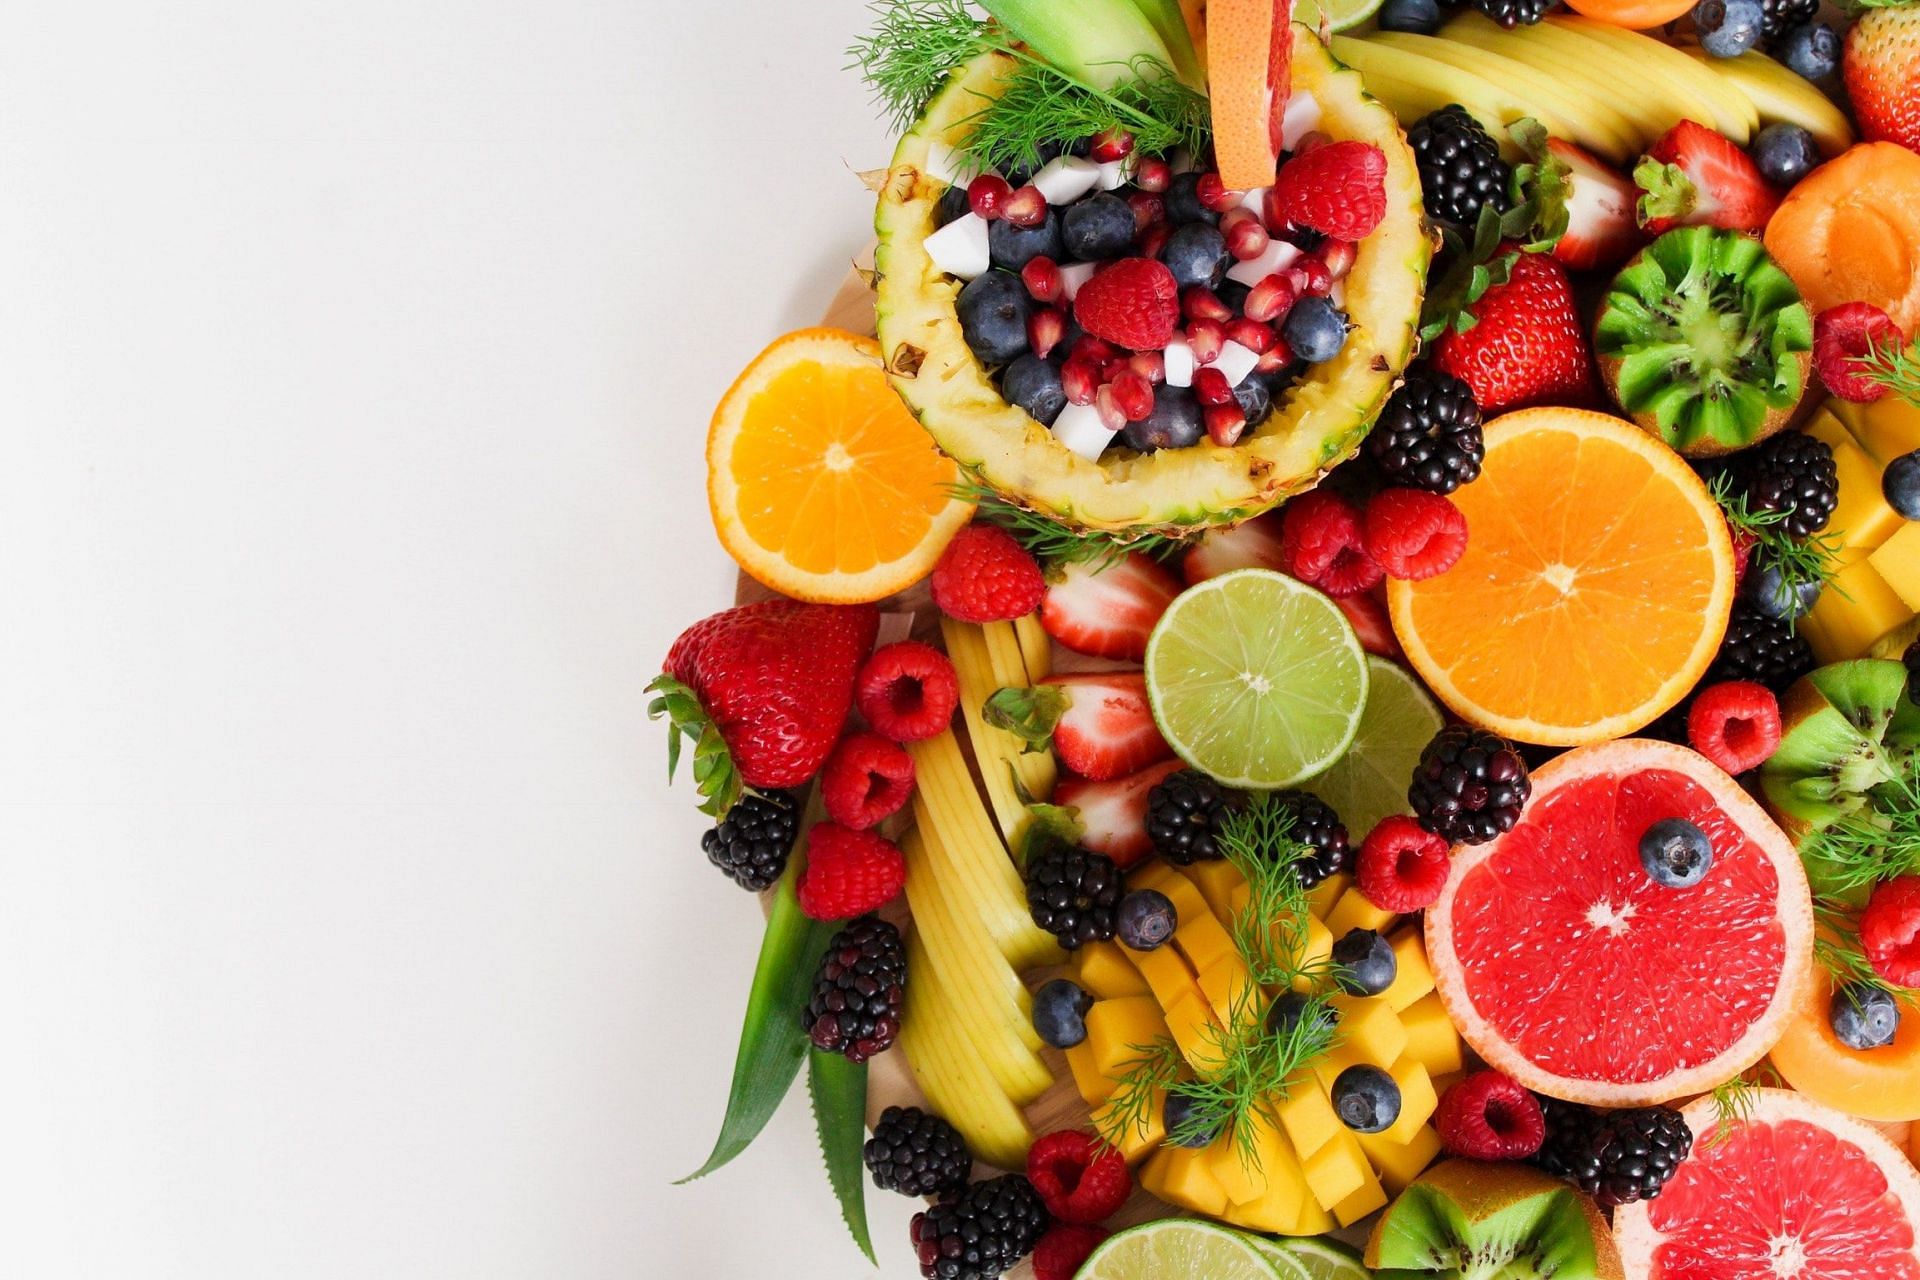 Fruits and vegetables are must-have for oily skin (Image via Pexels)